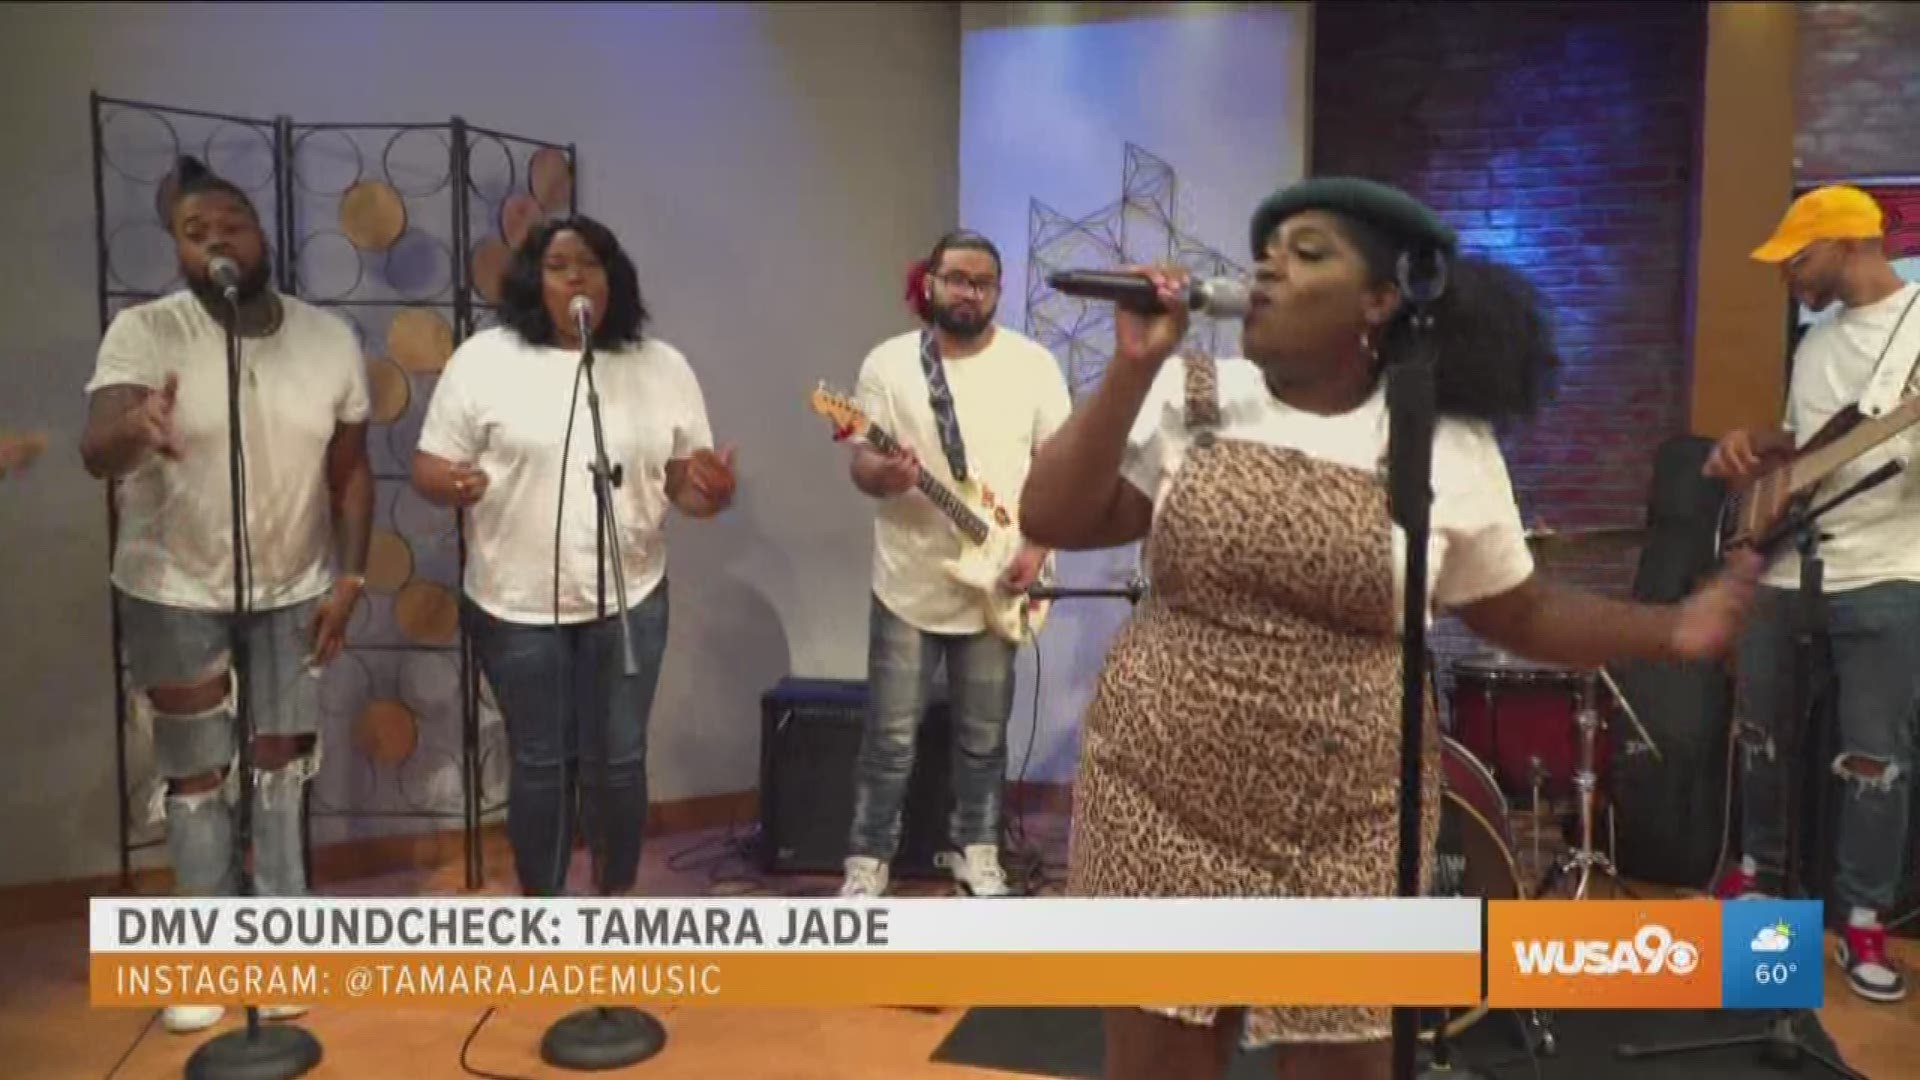 For this week's DMV Soundcheck performance, Tamara Jade performs 'Rescue me' from her new album. This segment was sponsored by DC OCTFME.